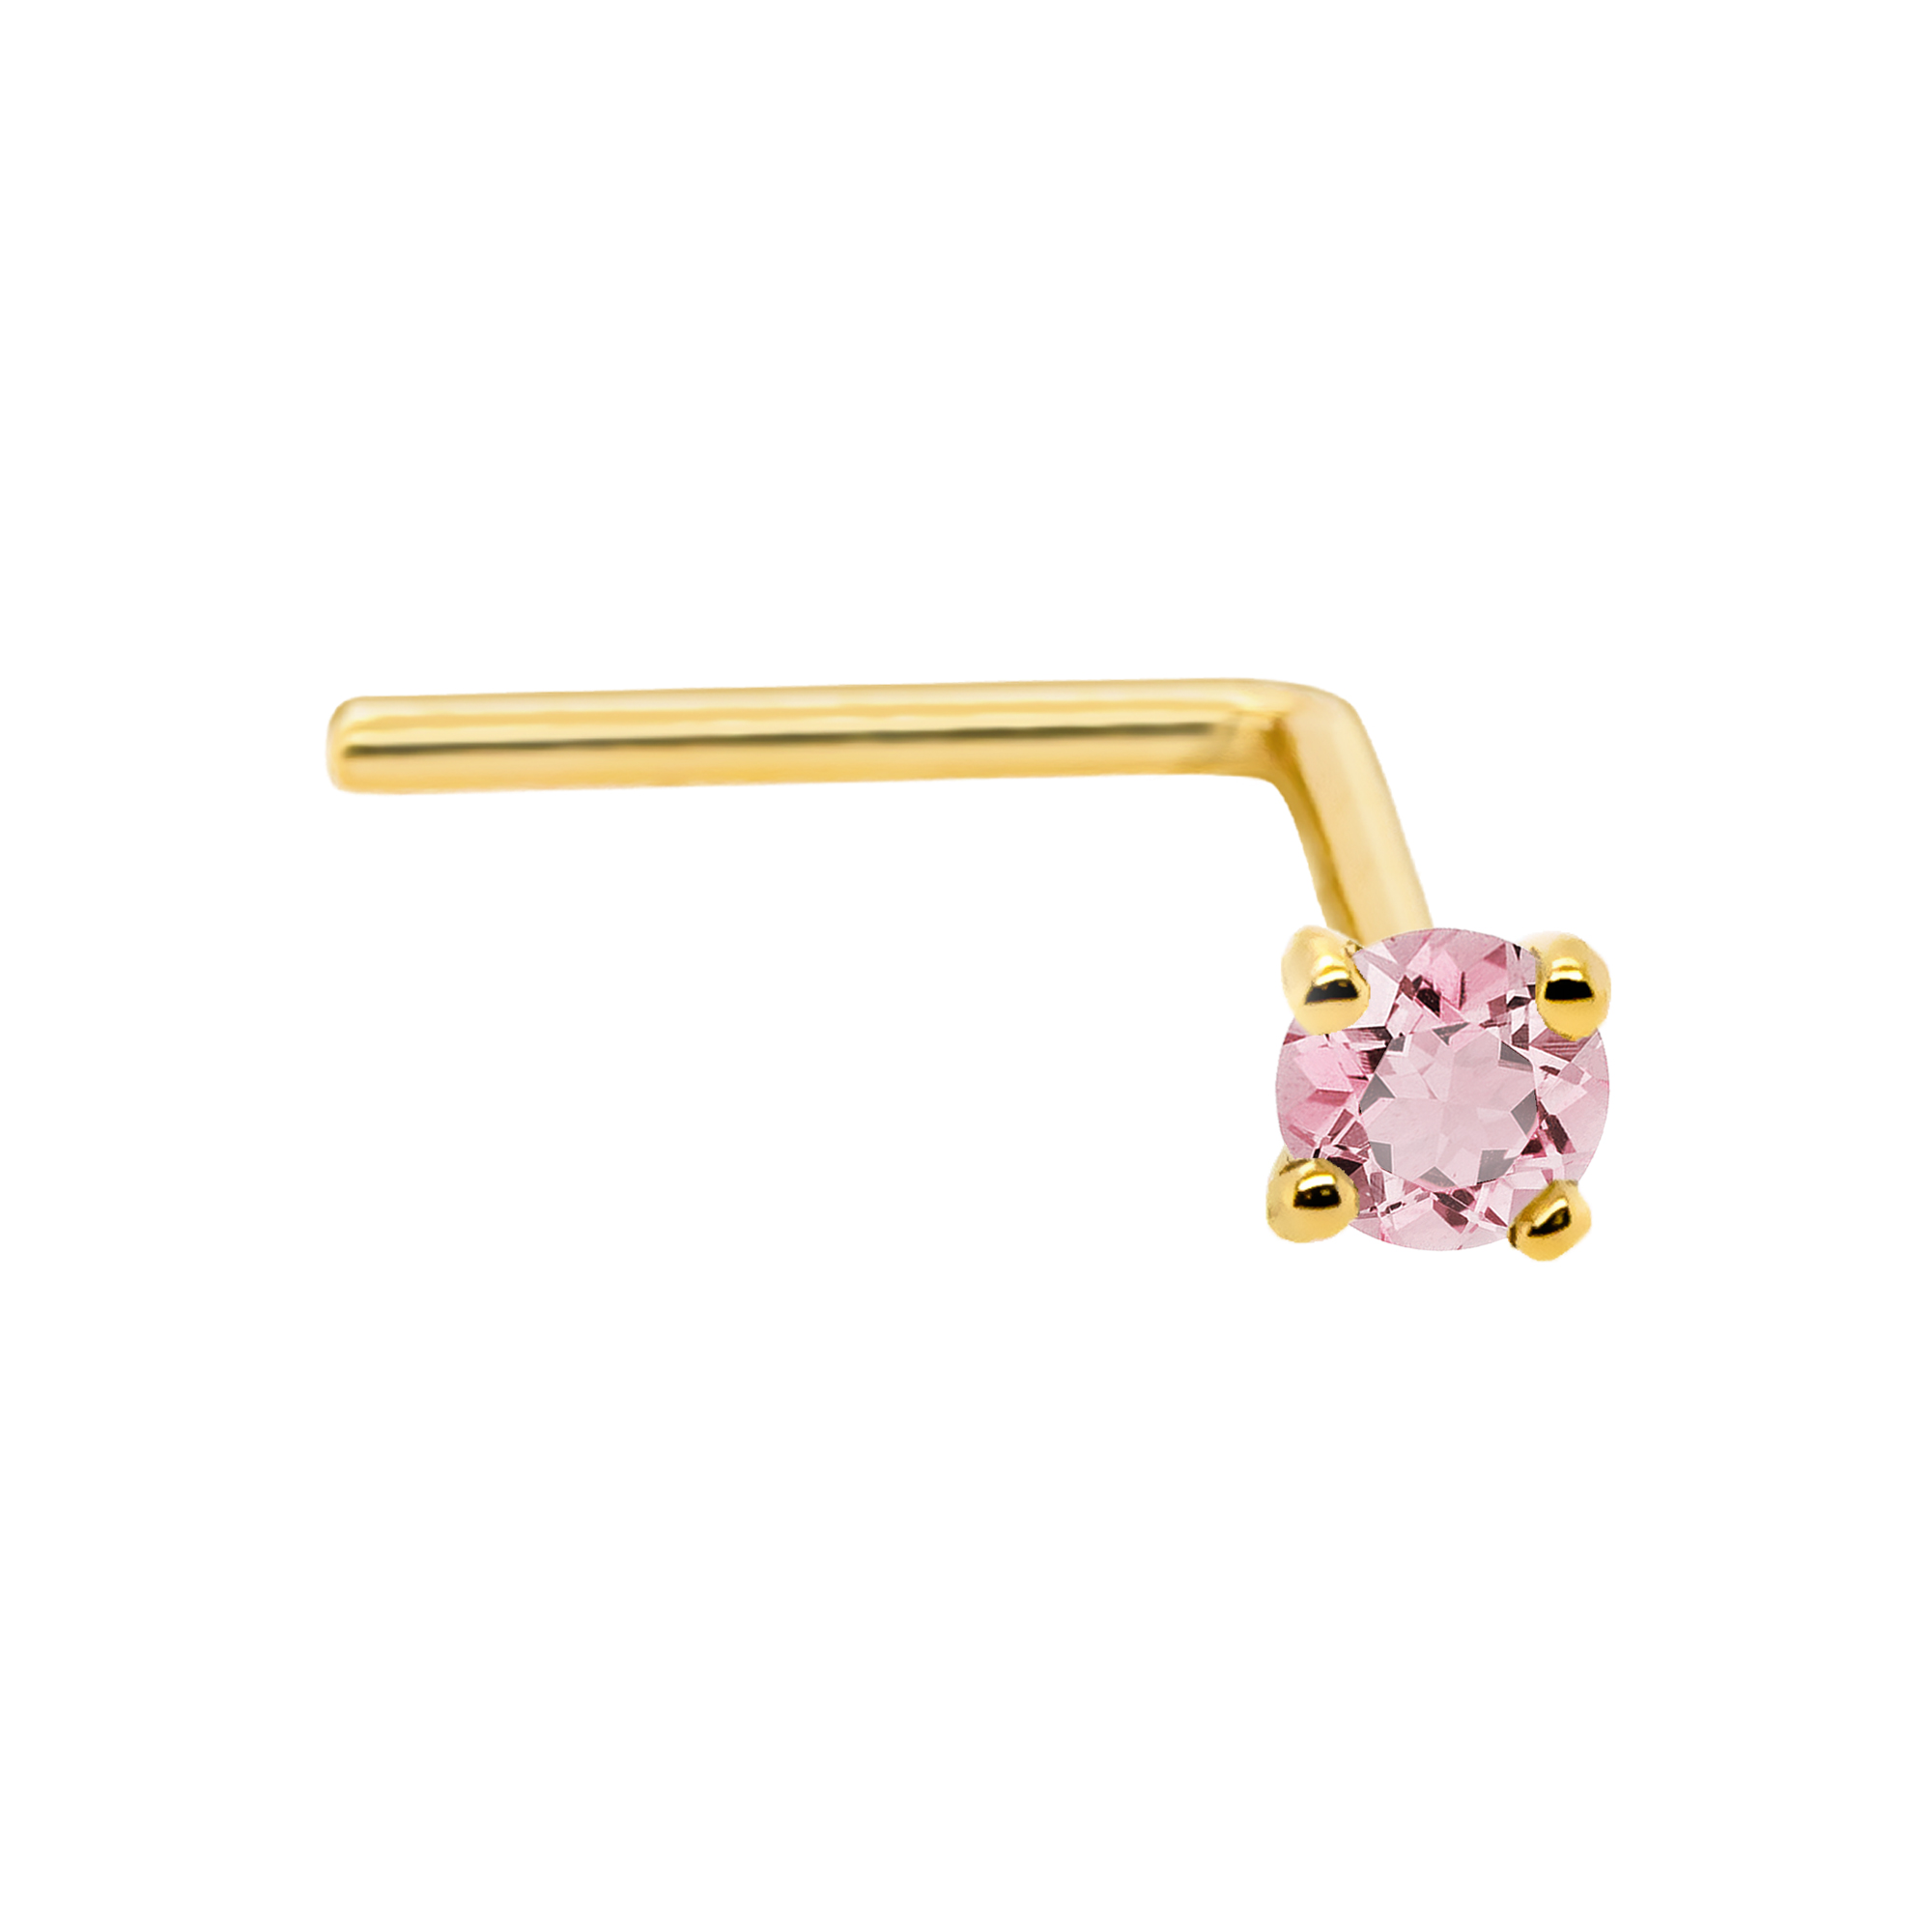 22G Solid 14Kt Gold L-Shape Nose Stud with real Pink Tourmaline Gemstone, 14kt Yellow Gold or 14kt White Gold Prong Setting - October Birthstone Nose Ring